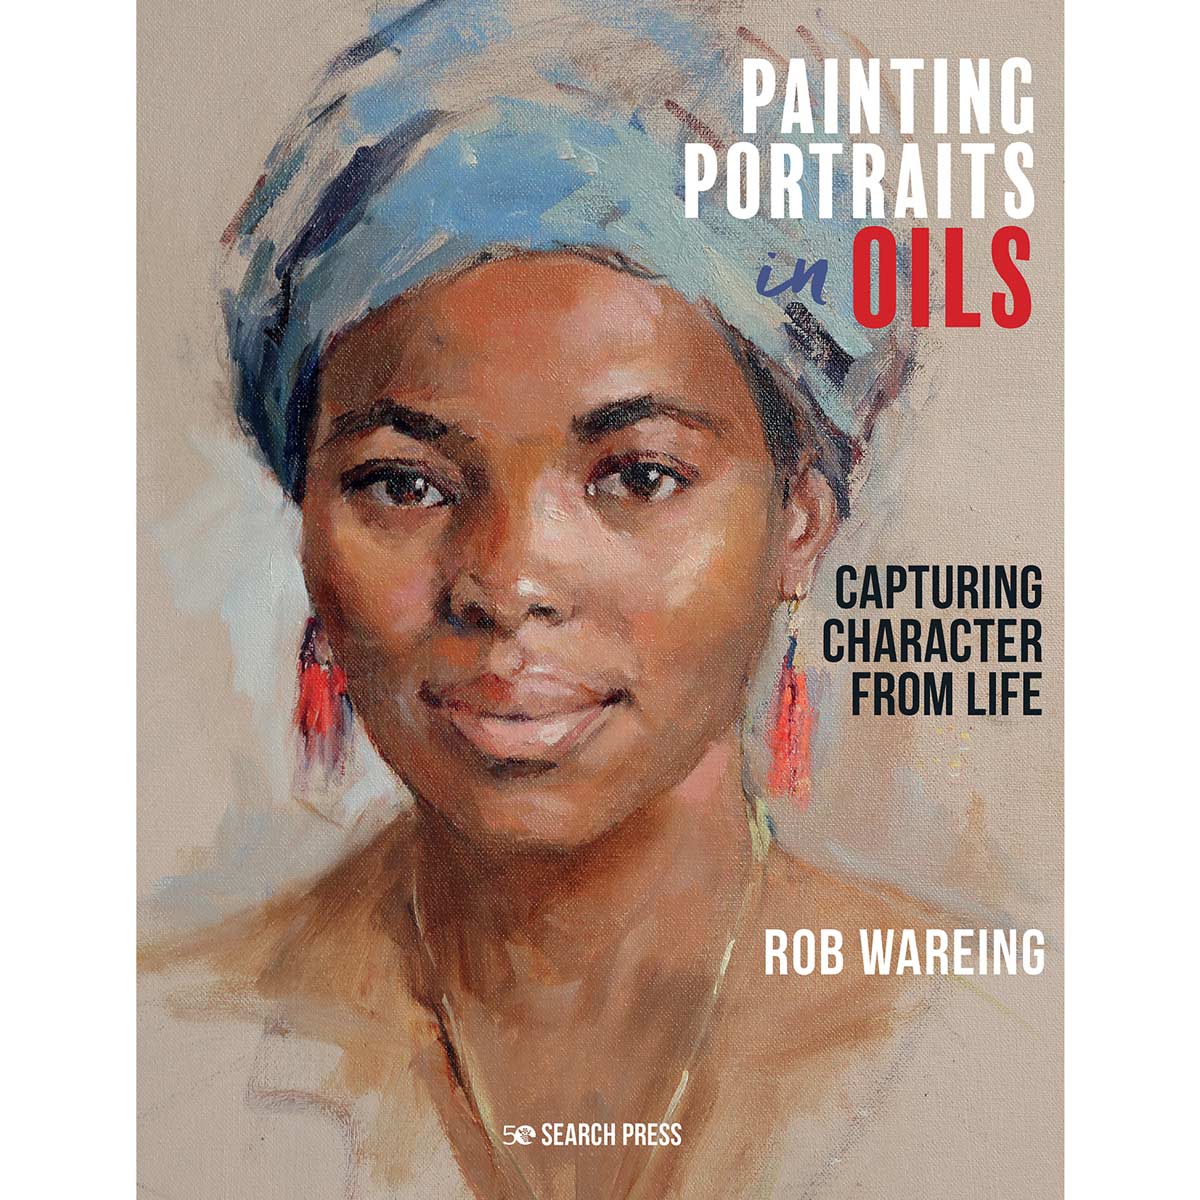 Search Press Books - Painting Portraits in Oils